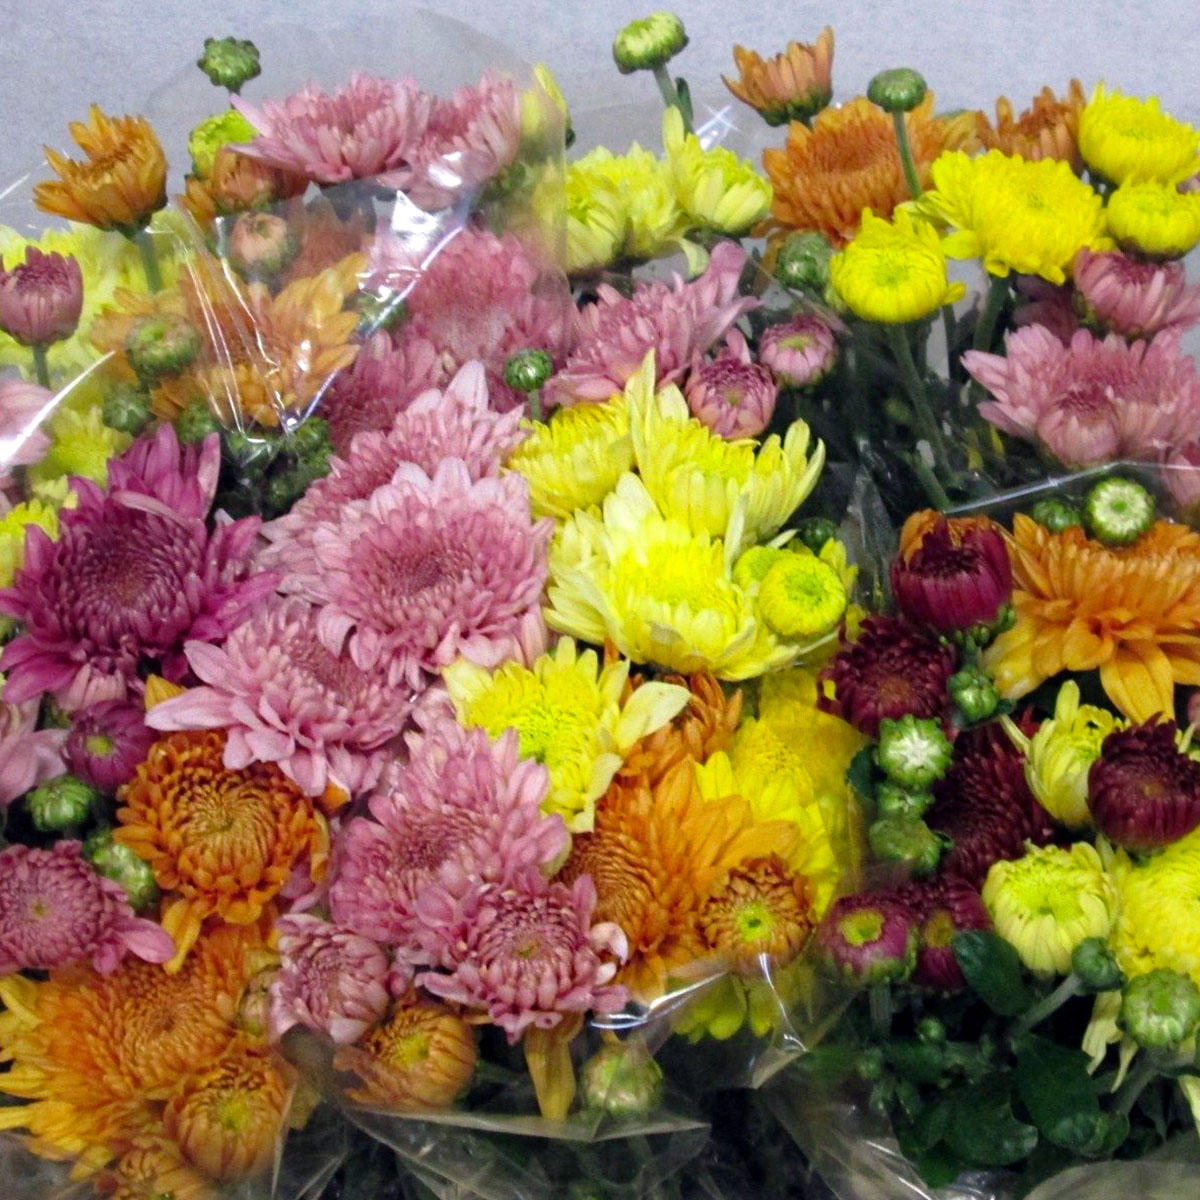 These Are Chrysal’s Best Tips on How to Care for Chrysanthemums and Wa...